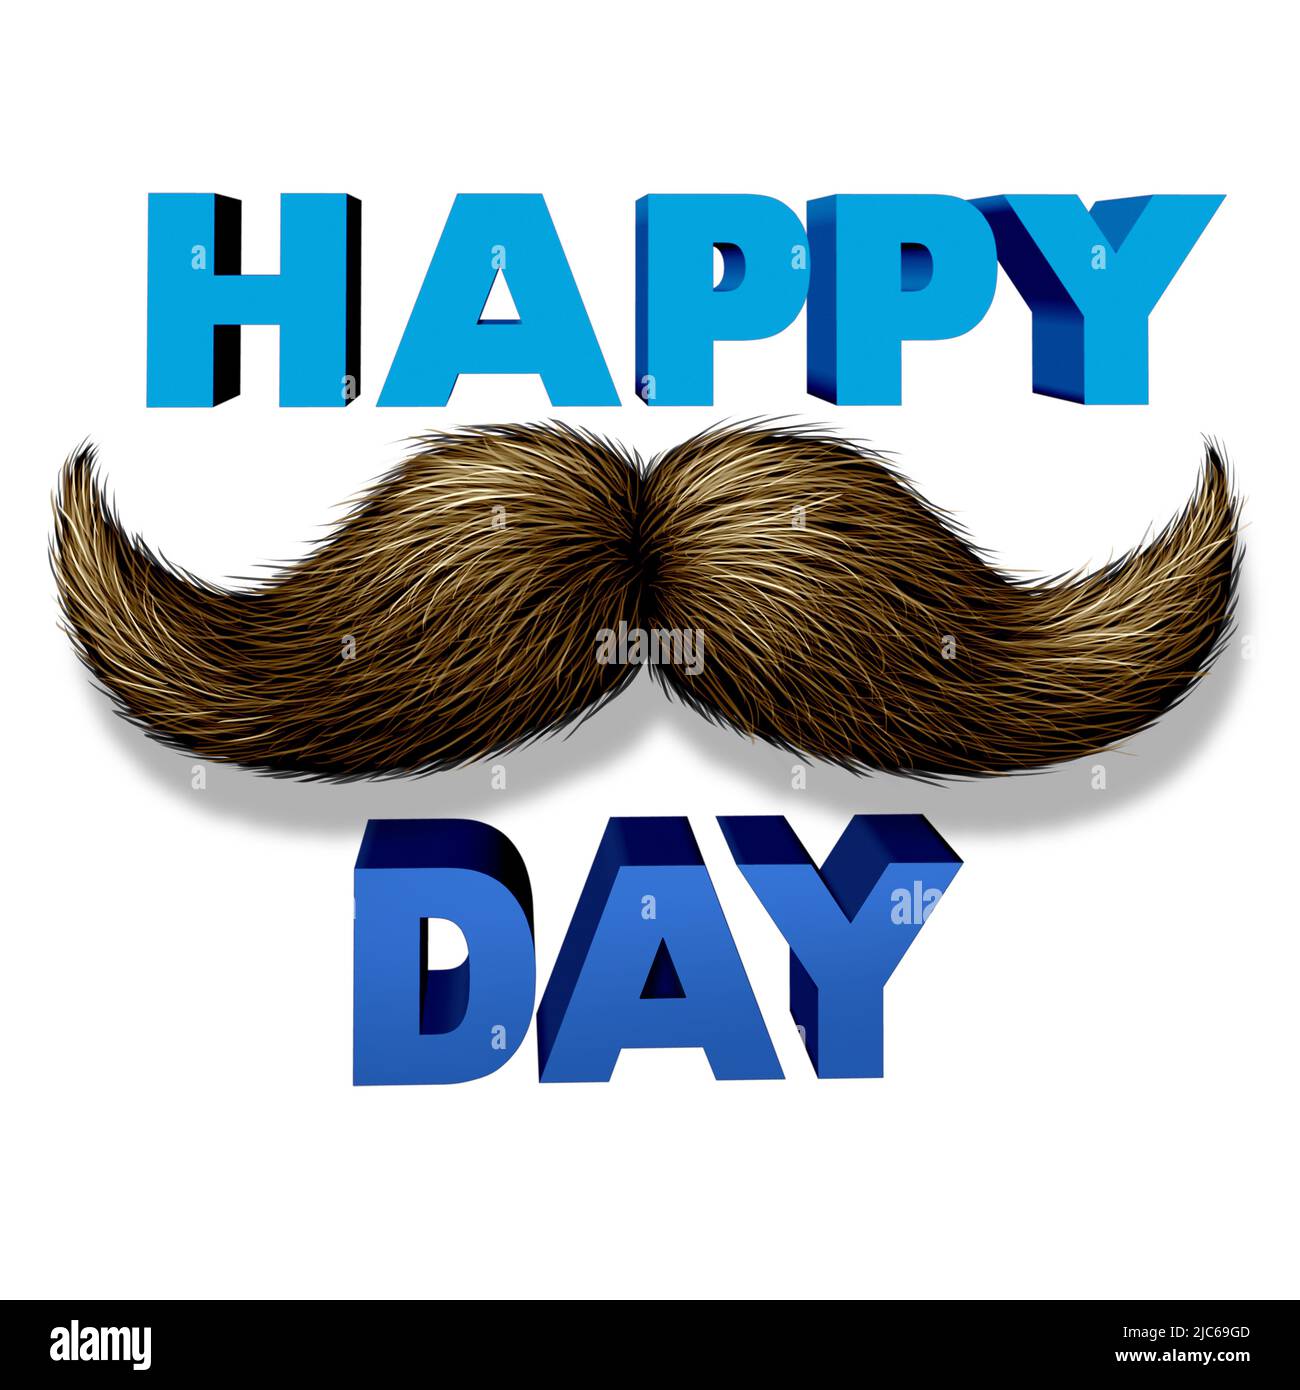 Happy fathers day celebration and fatherhood concept as a thank you to the best dad message as a mustache with long whiskers on a white background. Stock Photo